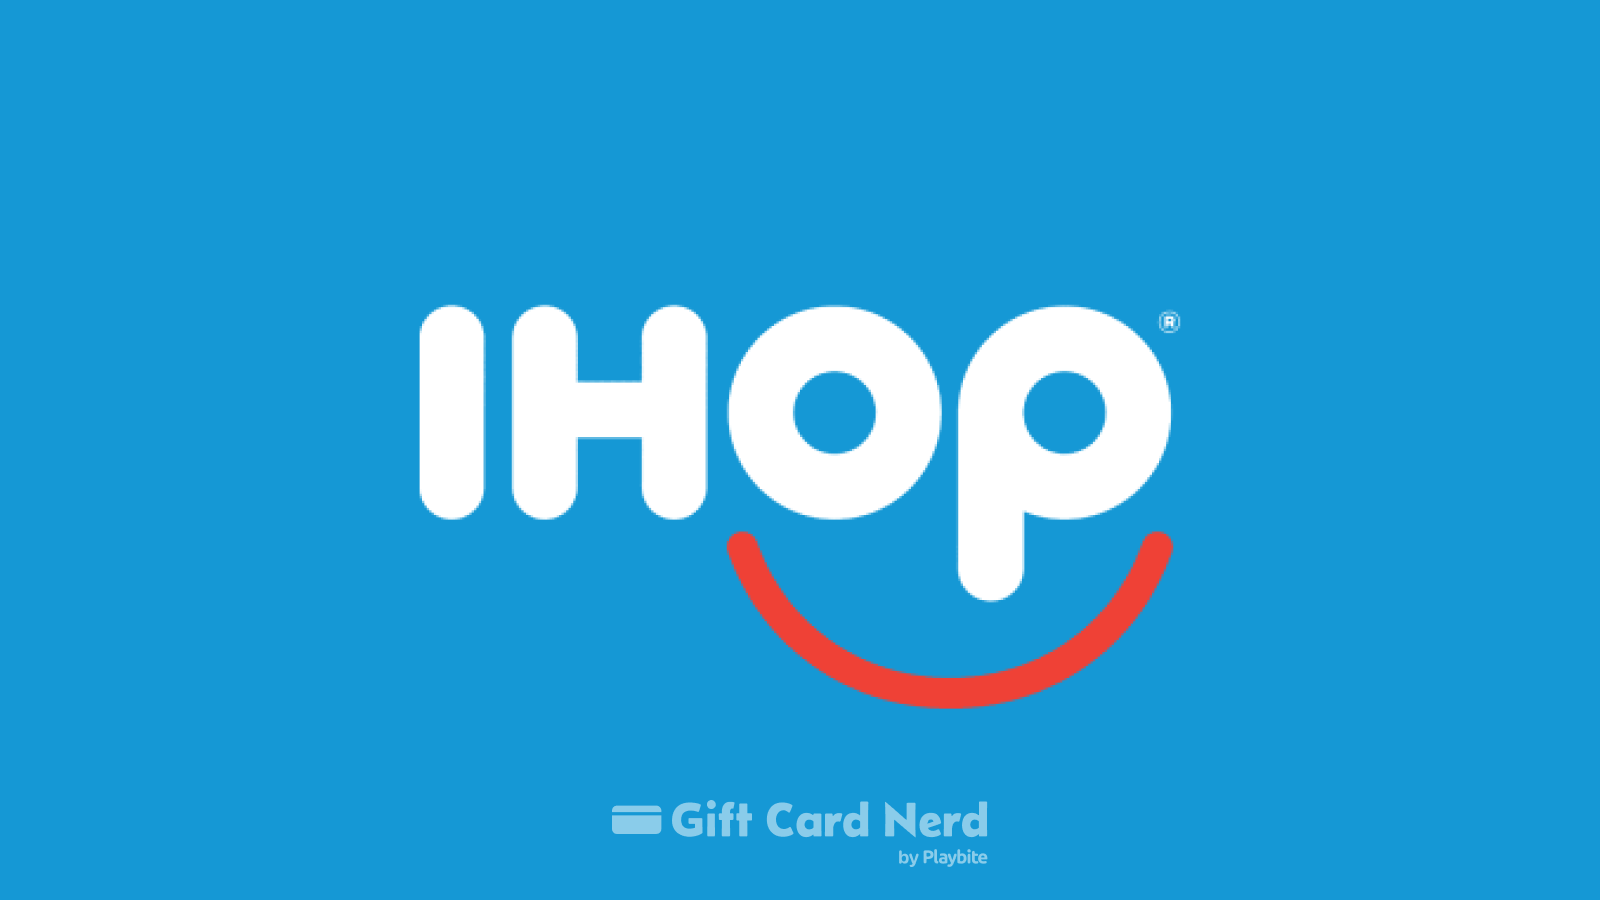 Does CVS Sell IHOP Gift Cards?